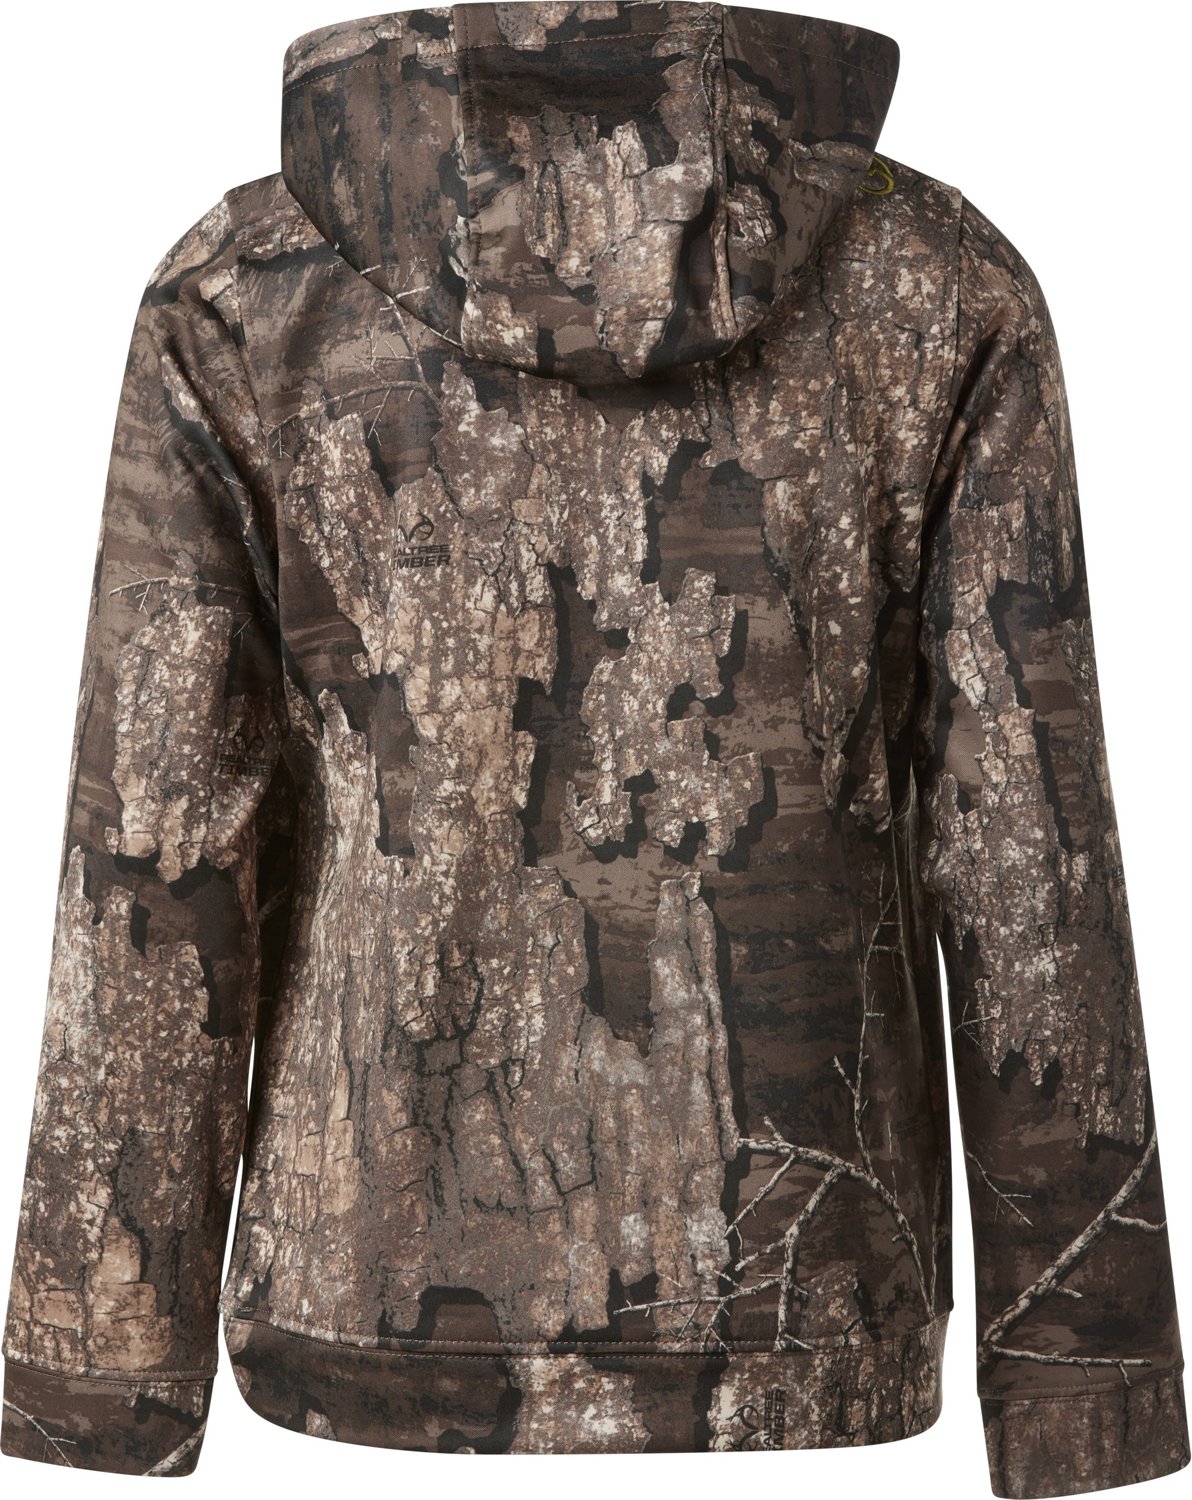 Magellan Outdoors Boys' Clothing On Sale Up To 90% Off Retail